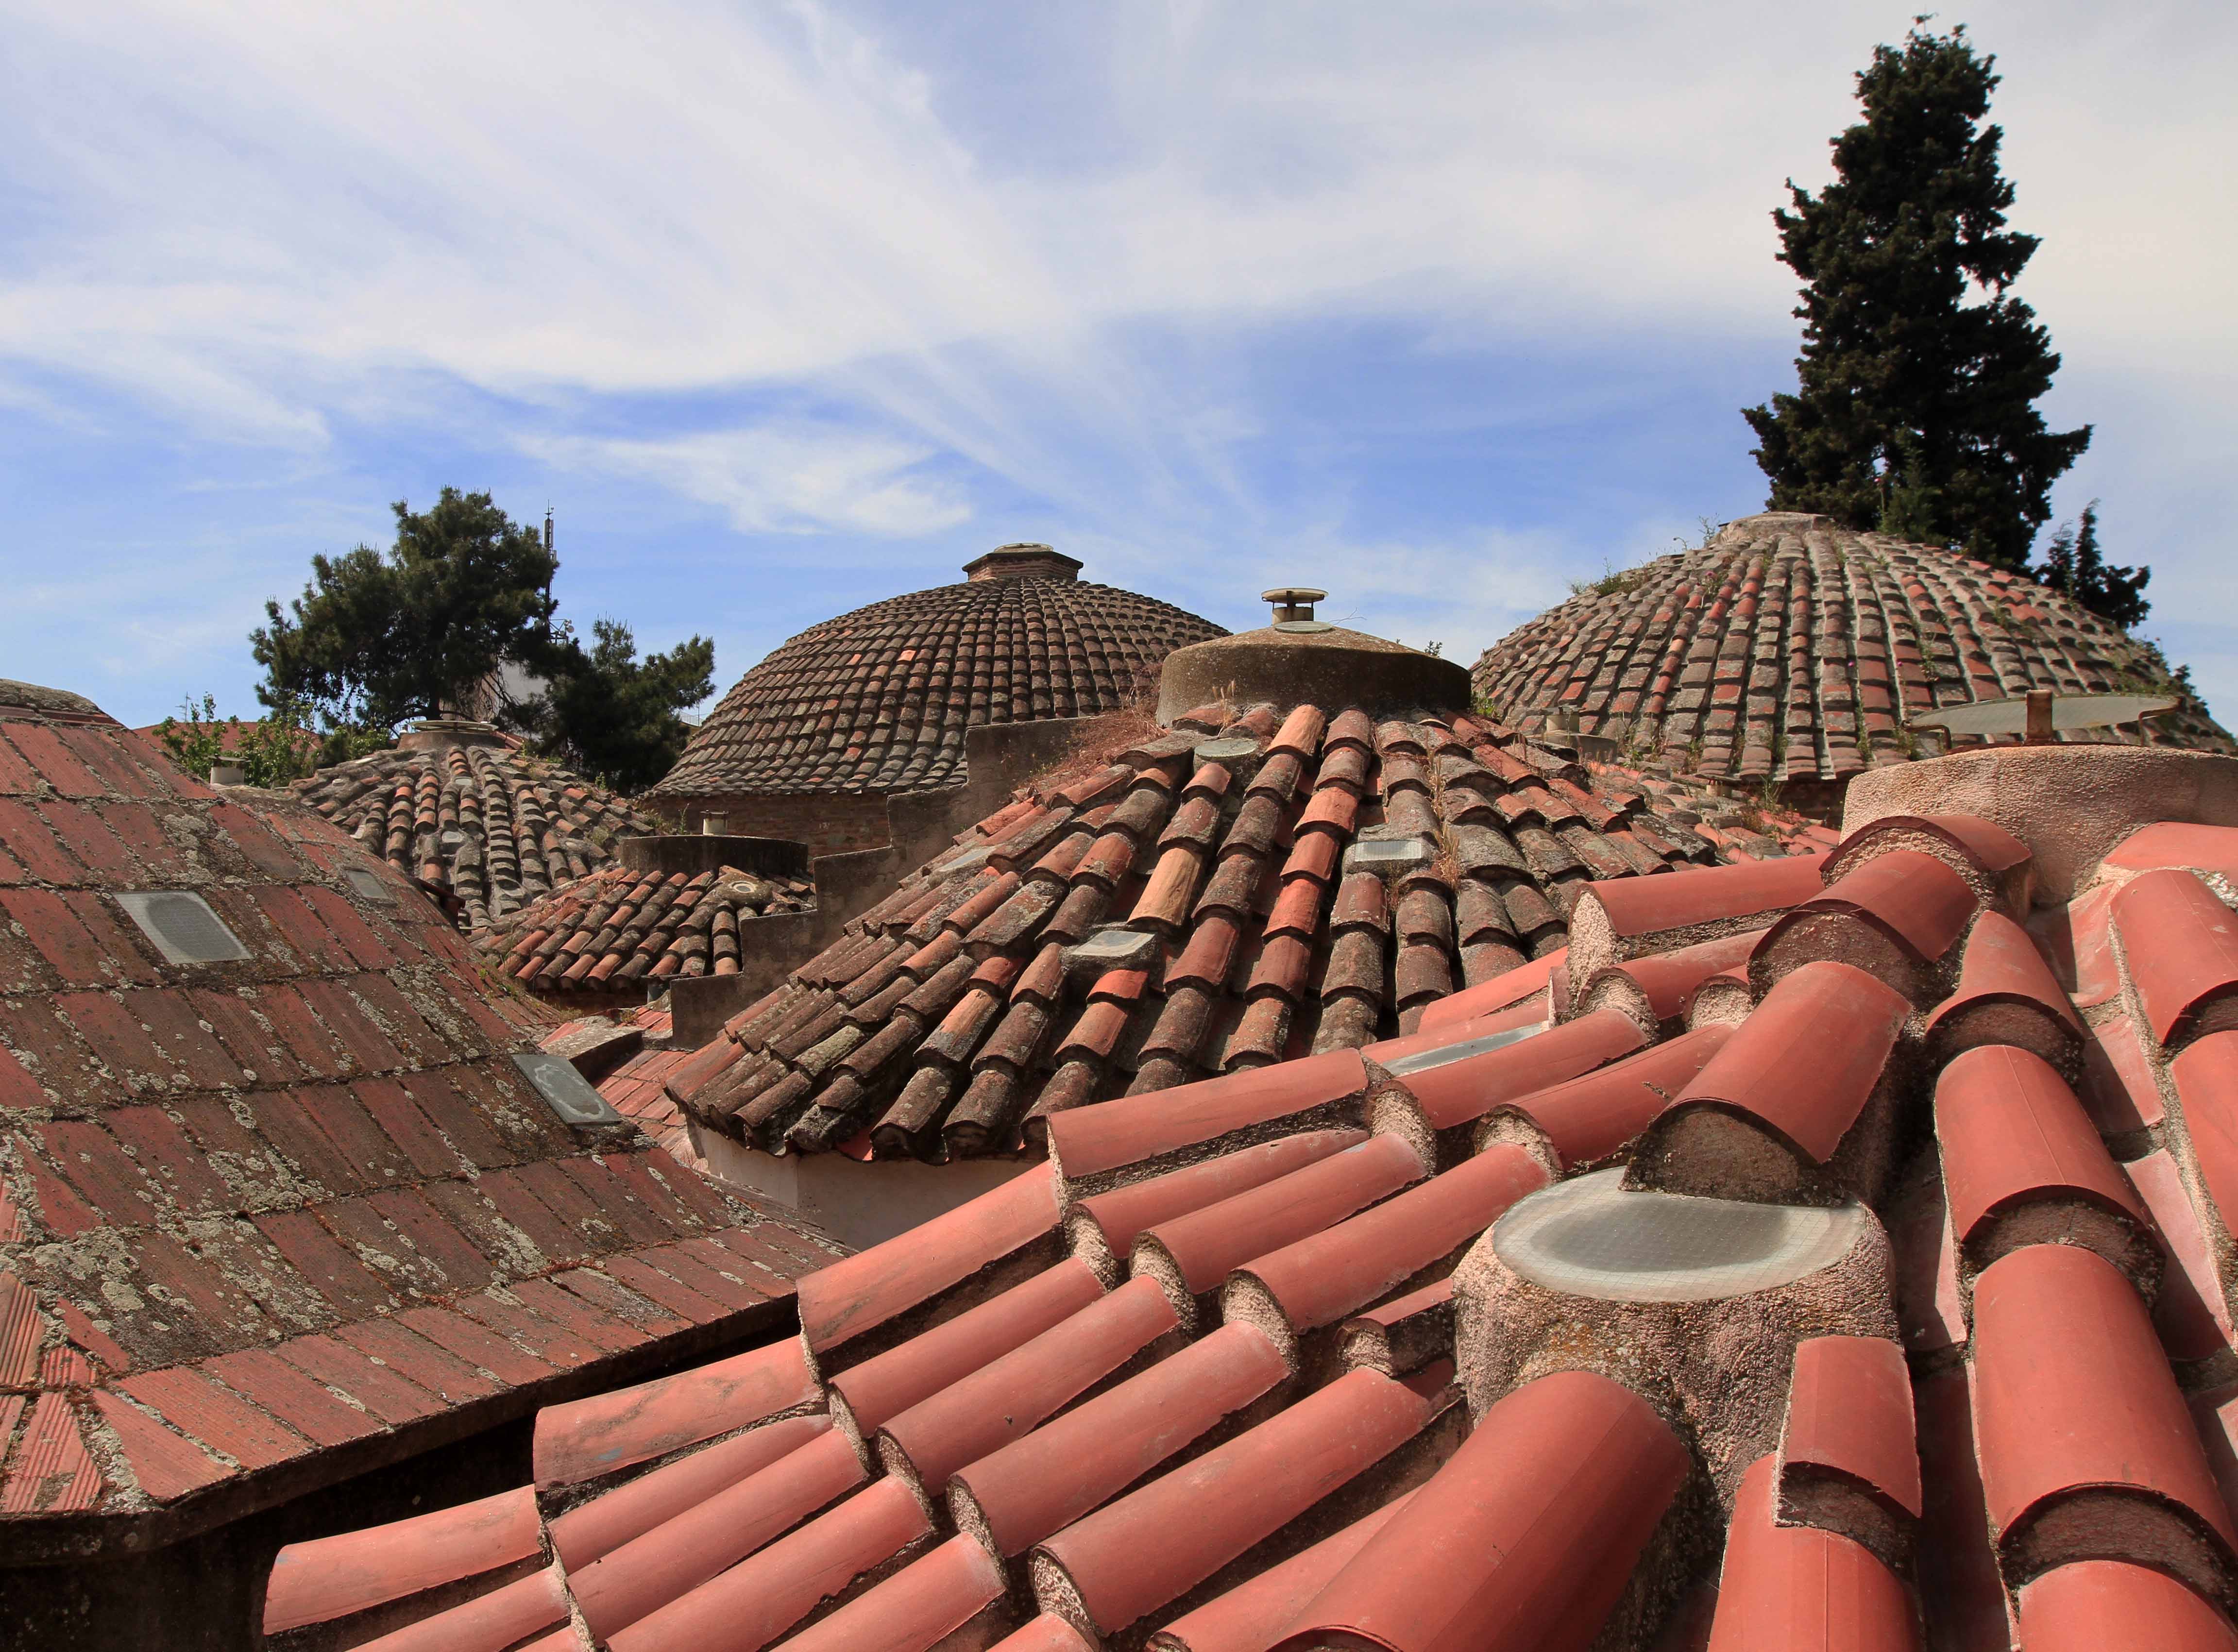 The tiled roof of the Paradisos Baths (